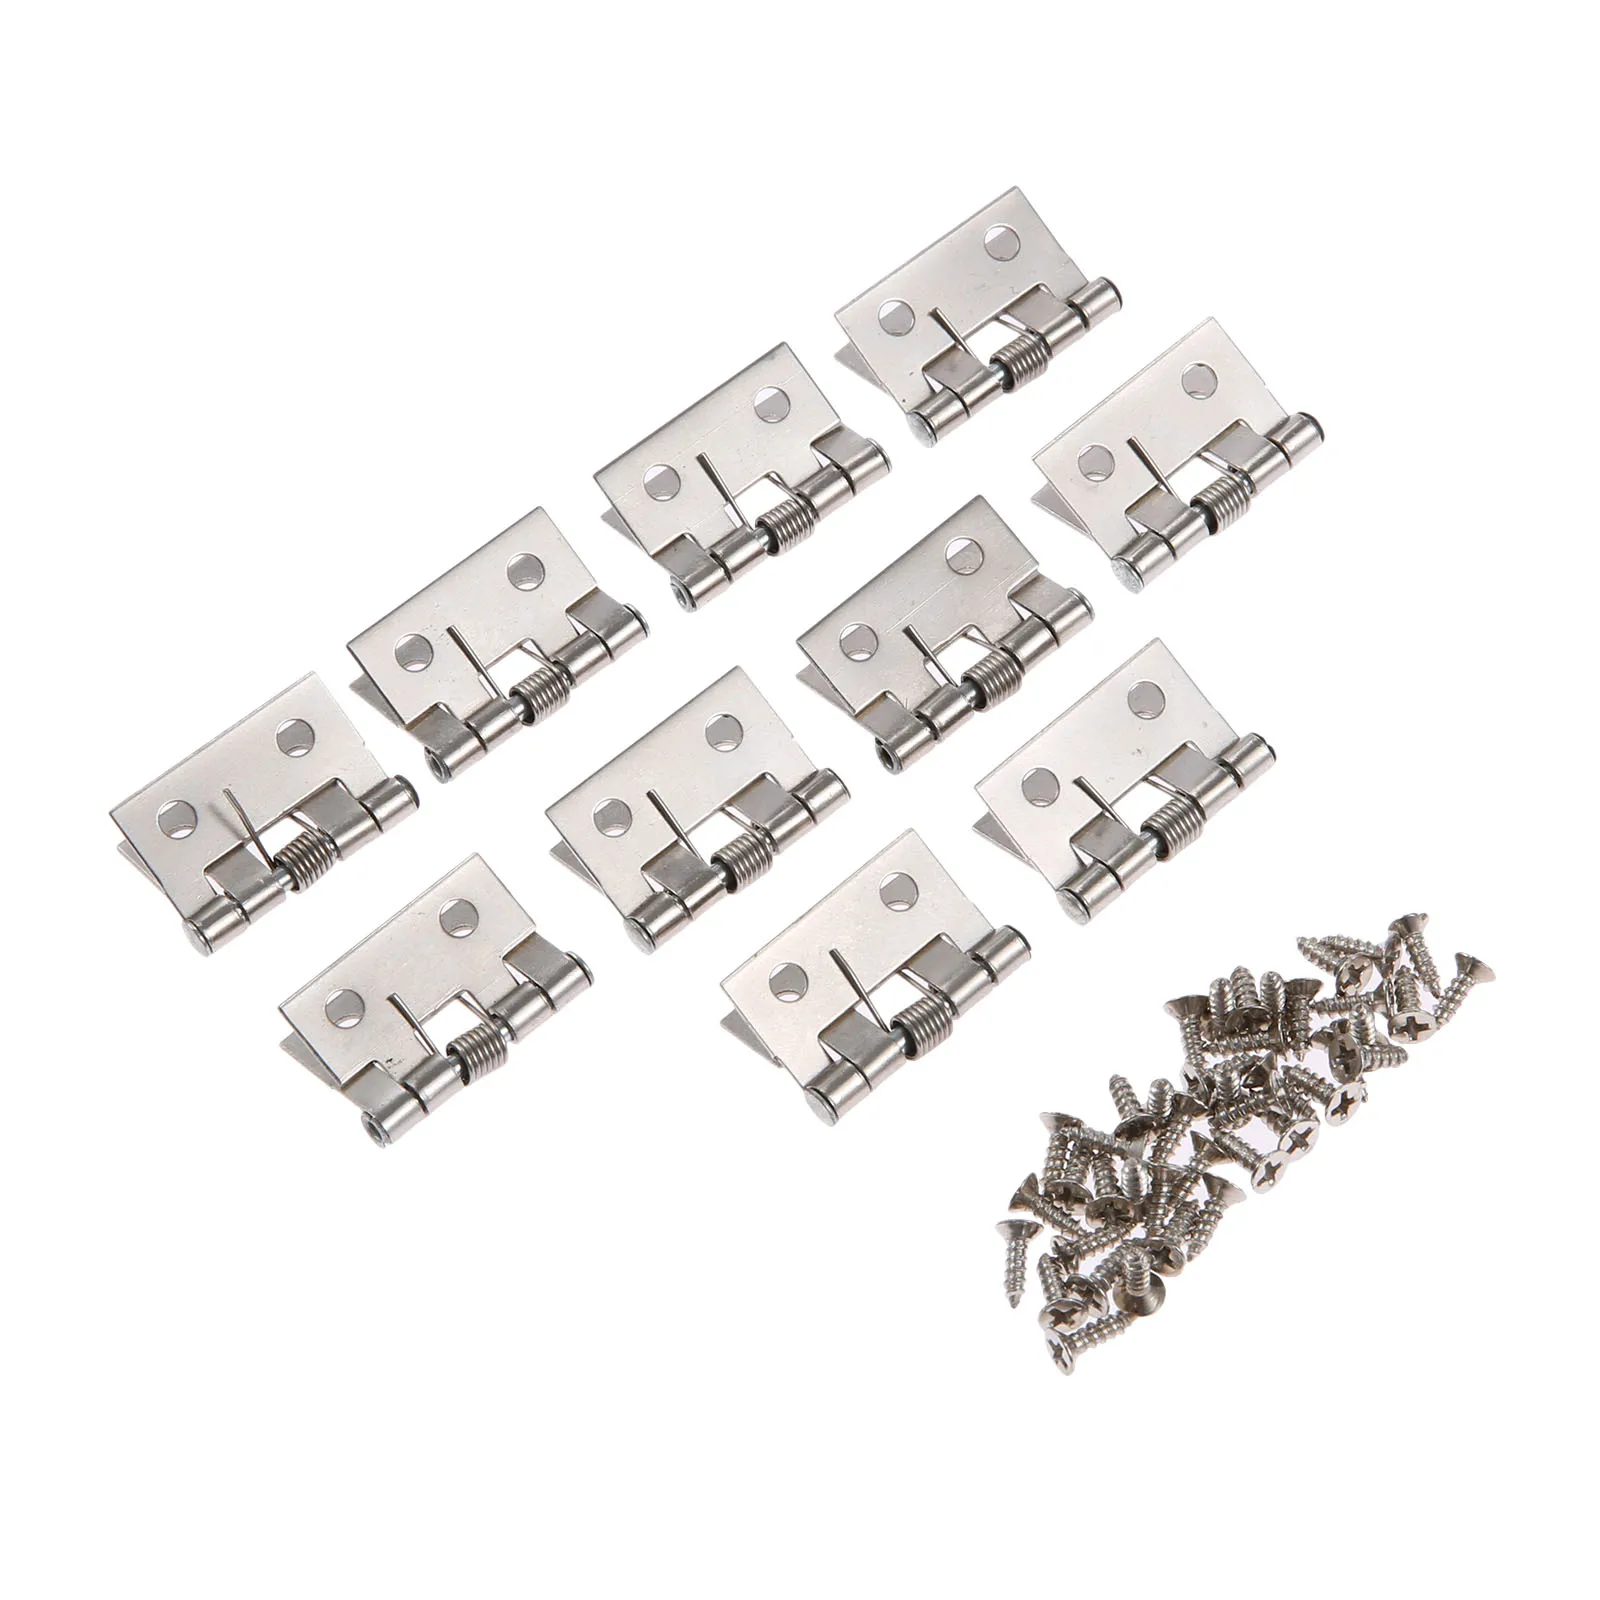 

10Pcs Spring Loaded Stainless Steel Butt Hinges for Furniture Cabinet Door Drawer Jewelry Wood Box Decorative Mini Hinge 26*31mm